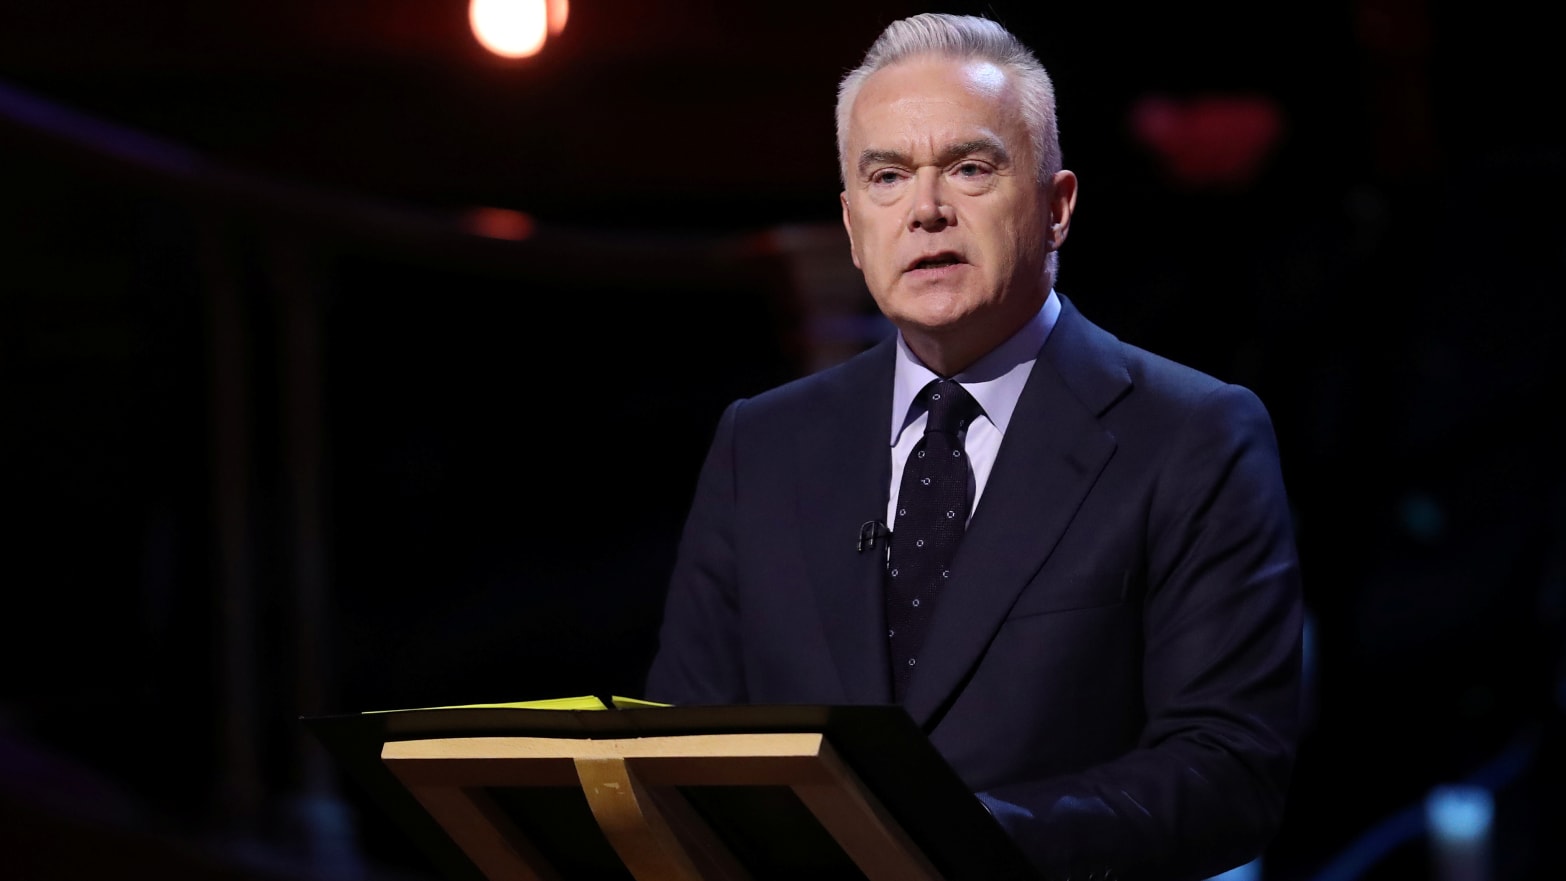 Huw Edwards has resigned from the BBC after being suspended following allegations that he paid a teenager for sexually explicit images.